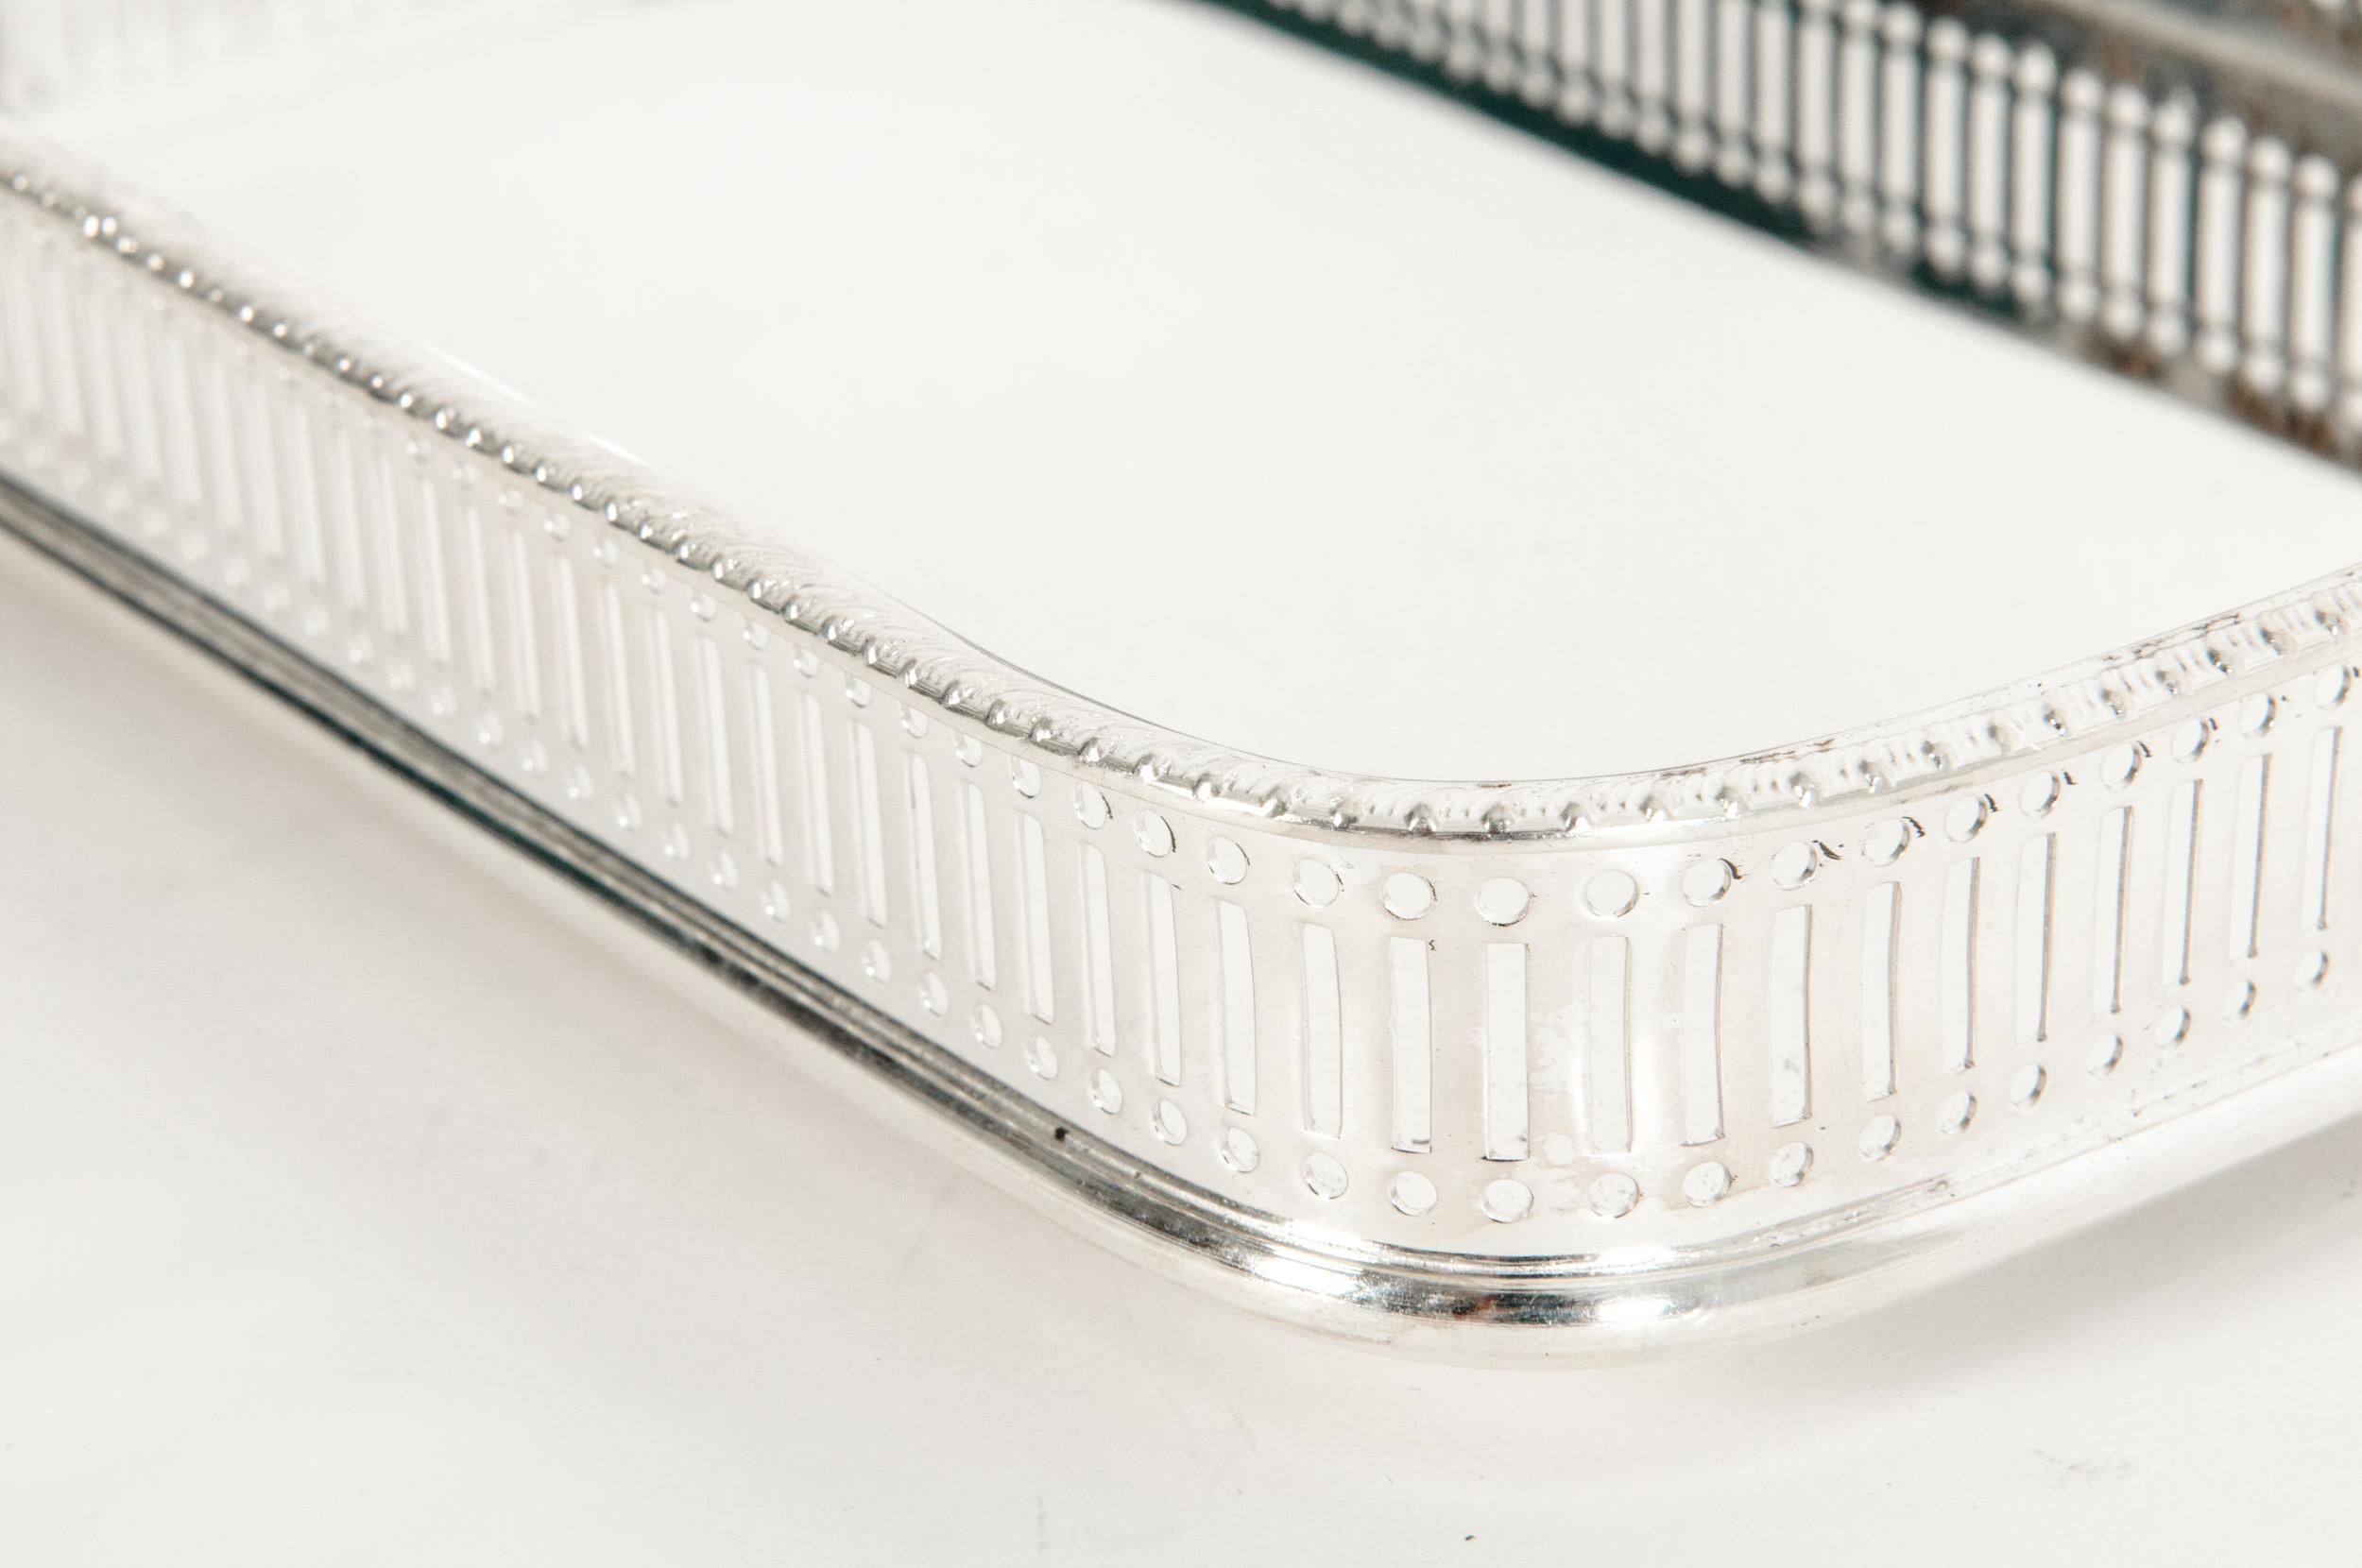 20th Century English Sheffield Plated Barware / Tableware Footed Tray